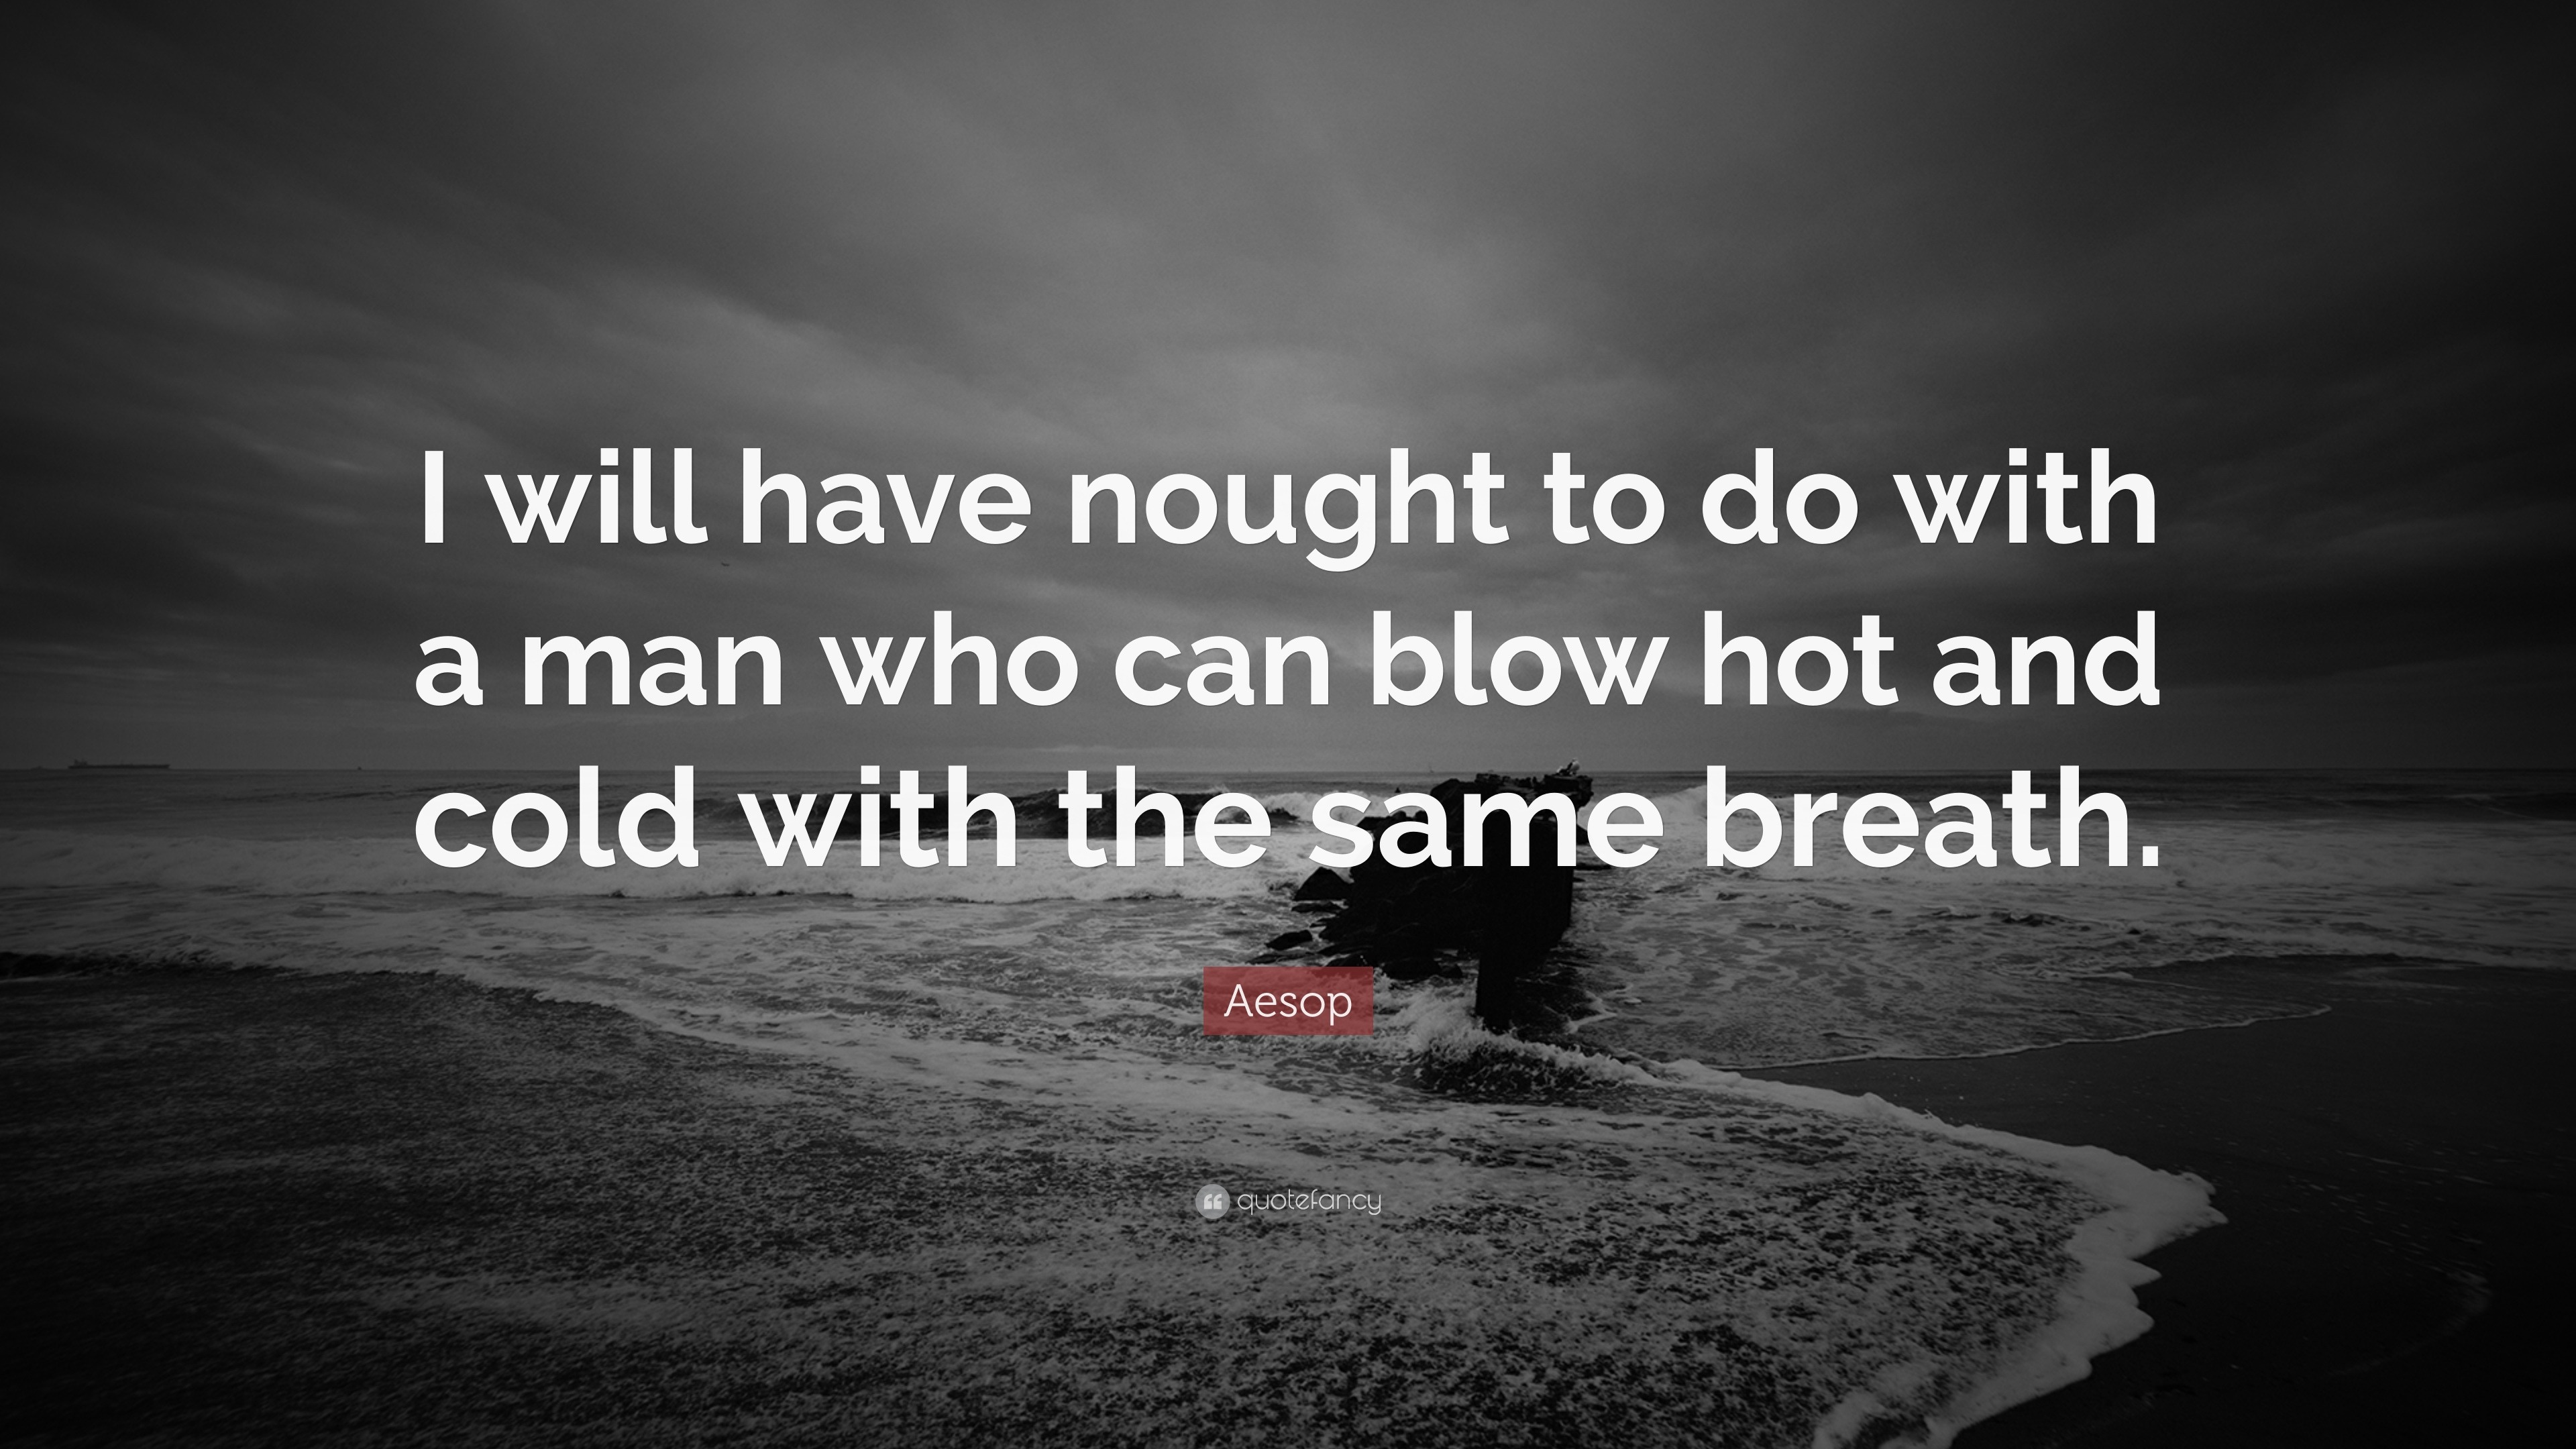 Aesop Quote: “I Will Have Nought To Do With A Man Who Can Blow Hot And